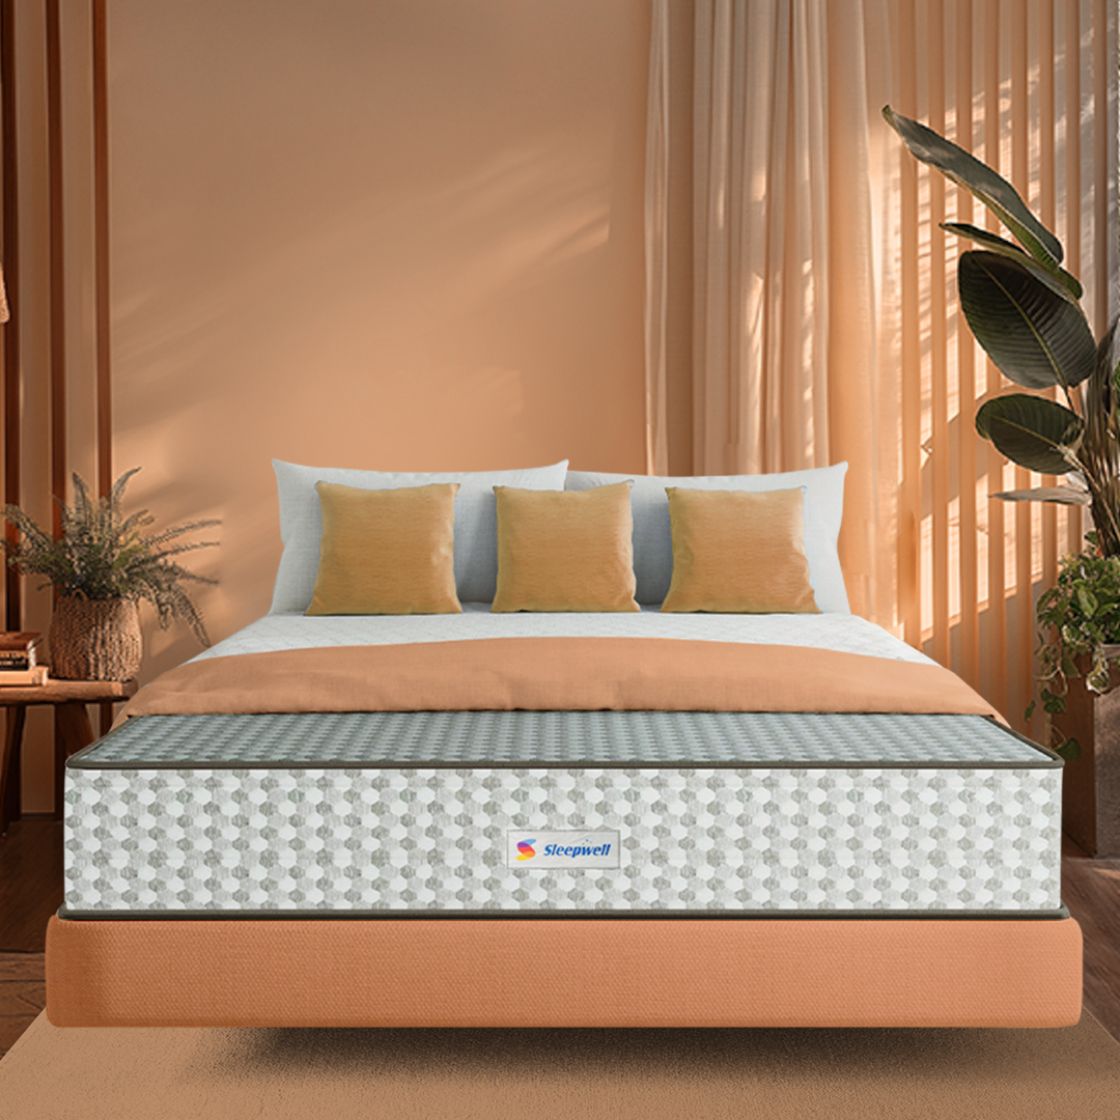 Sleepwell Dual PRO Profiled Foam Reversible 5-inch Queen Bed Size, Gentle and Firm, Triple Layered Anti Sag Foam Mattress (Grey, 72x60x5)